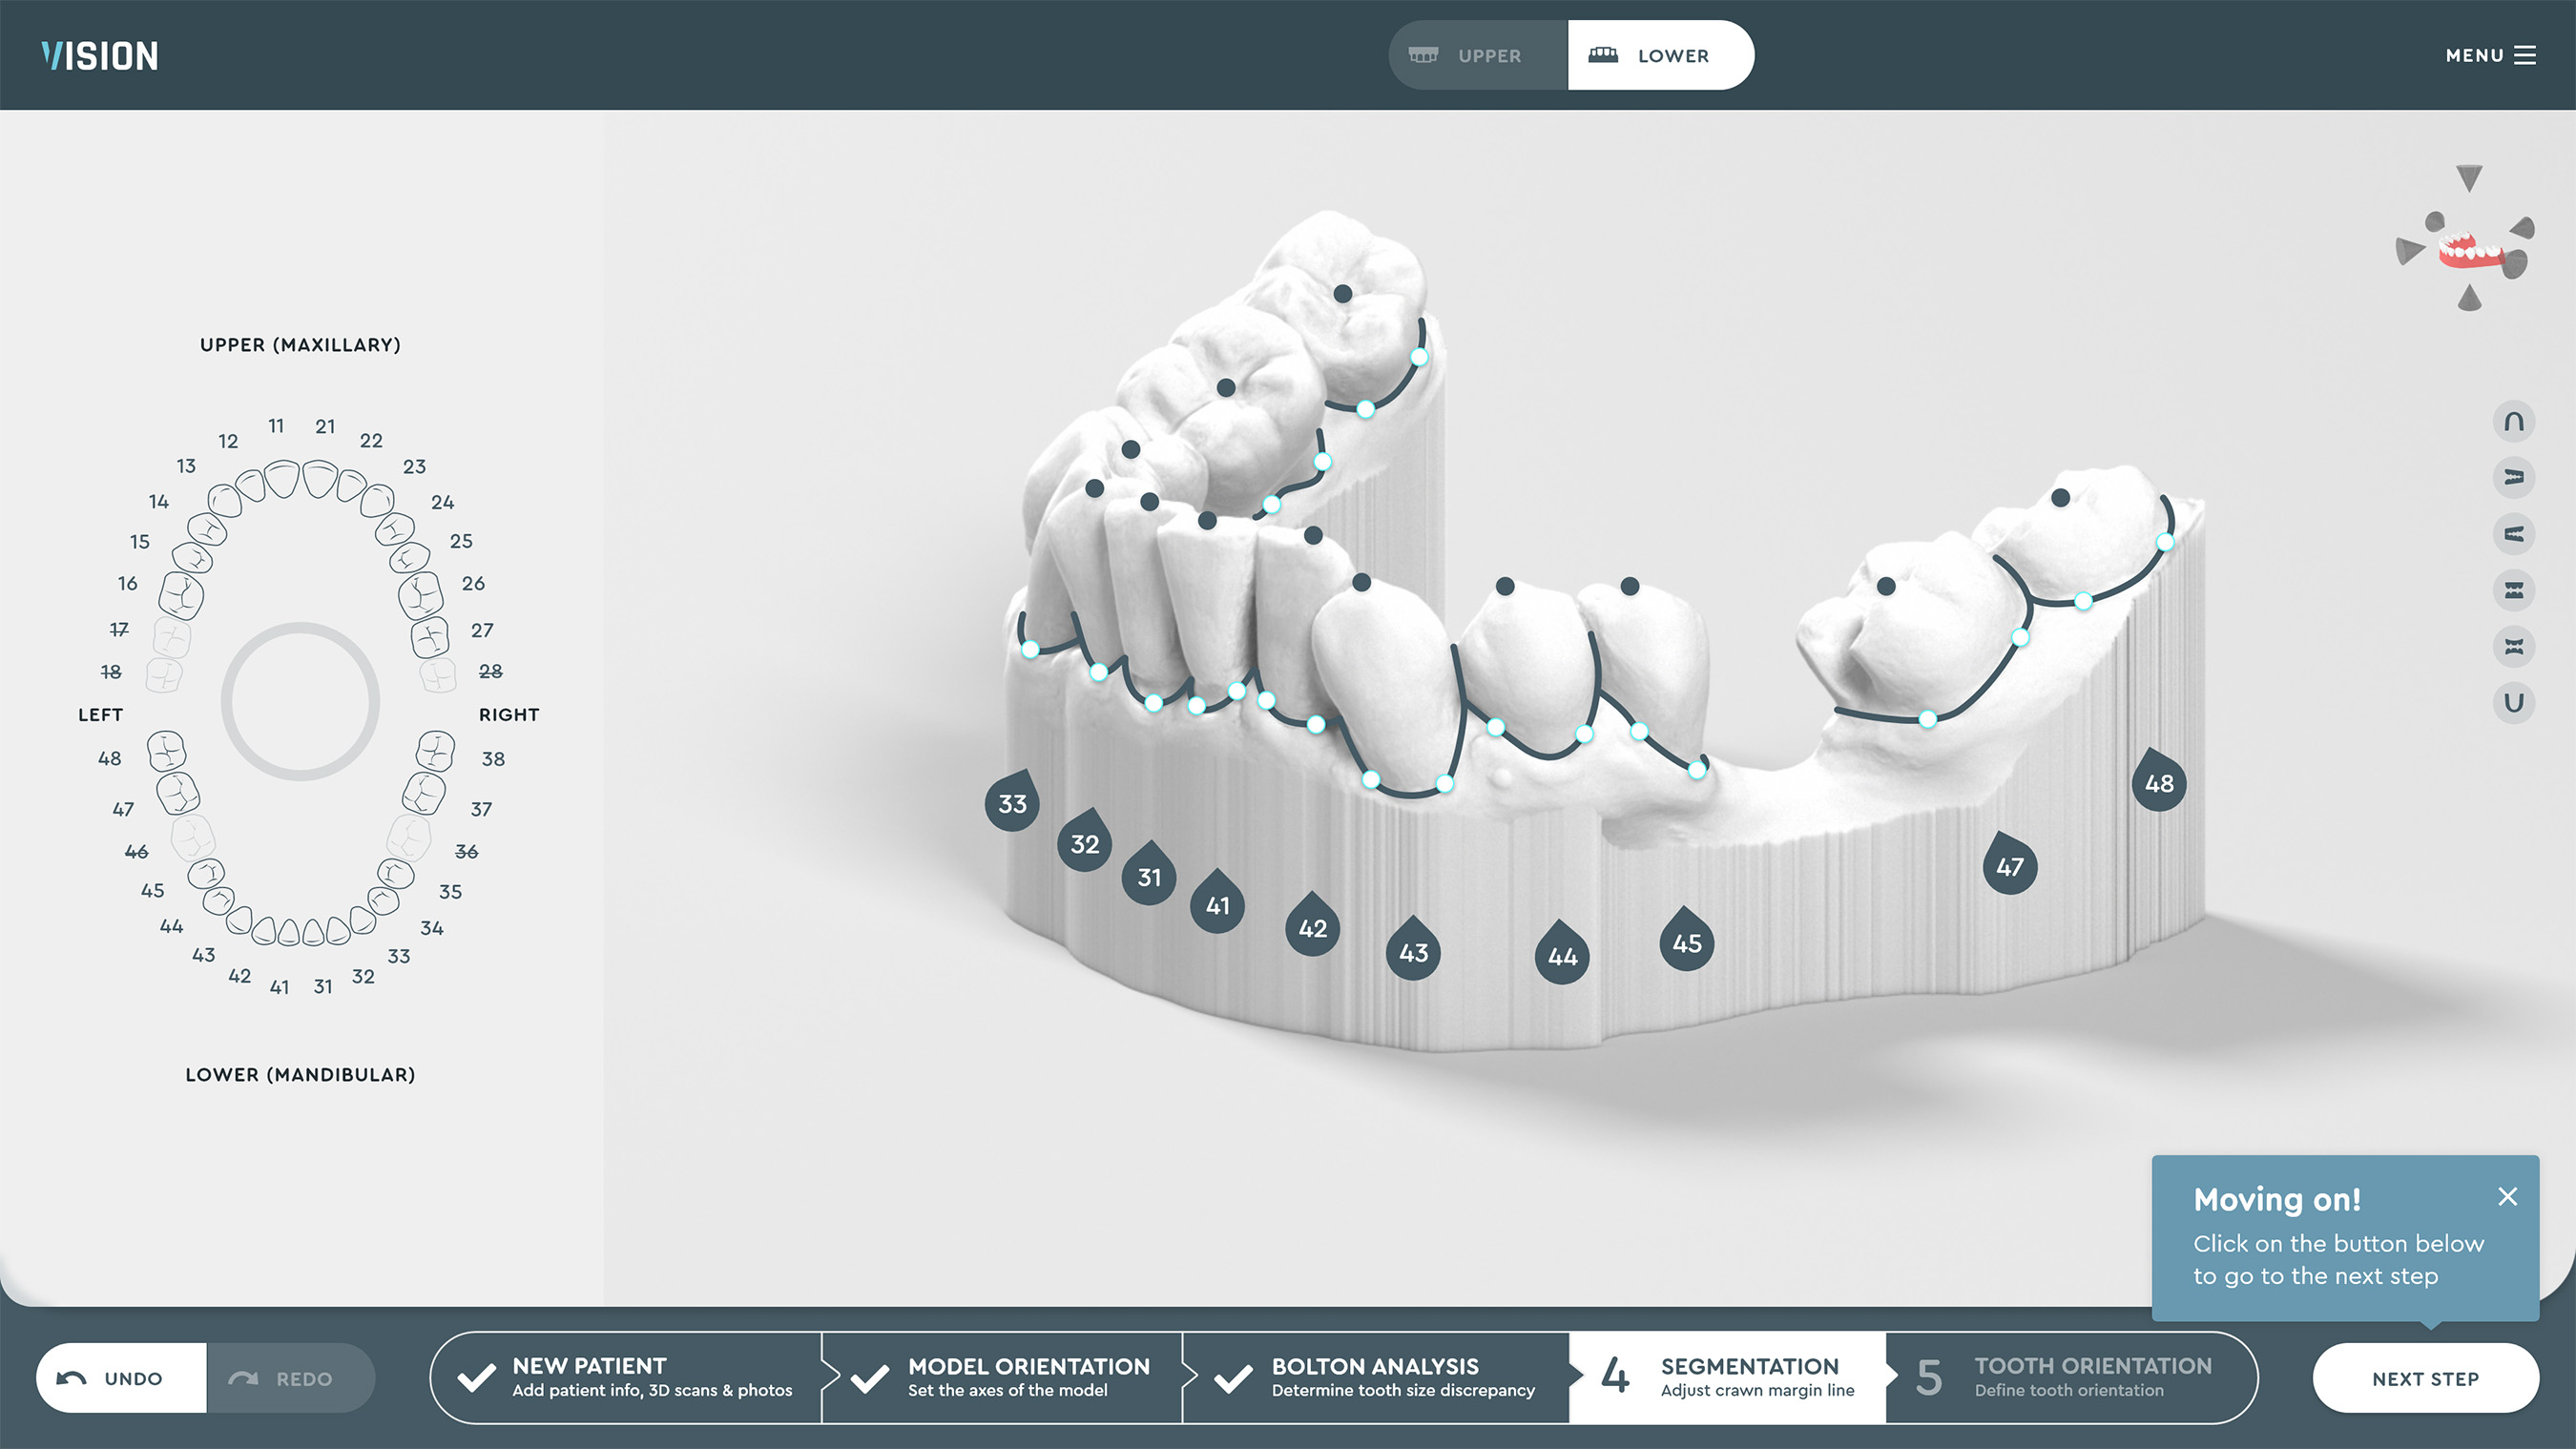 SoftSmile Software: Automated segmentation of teeth and gums